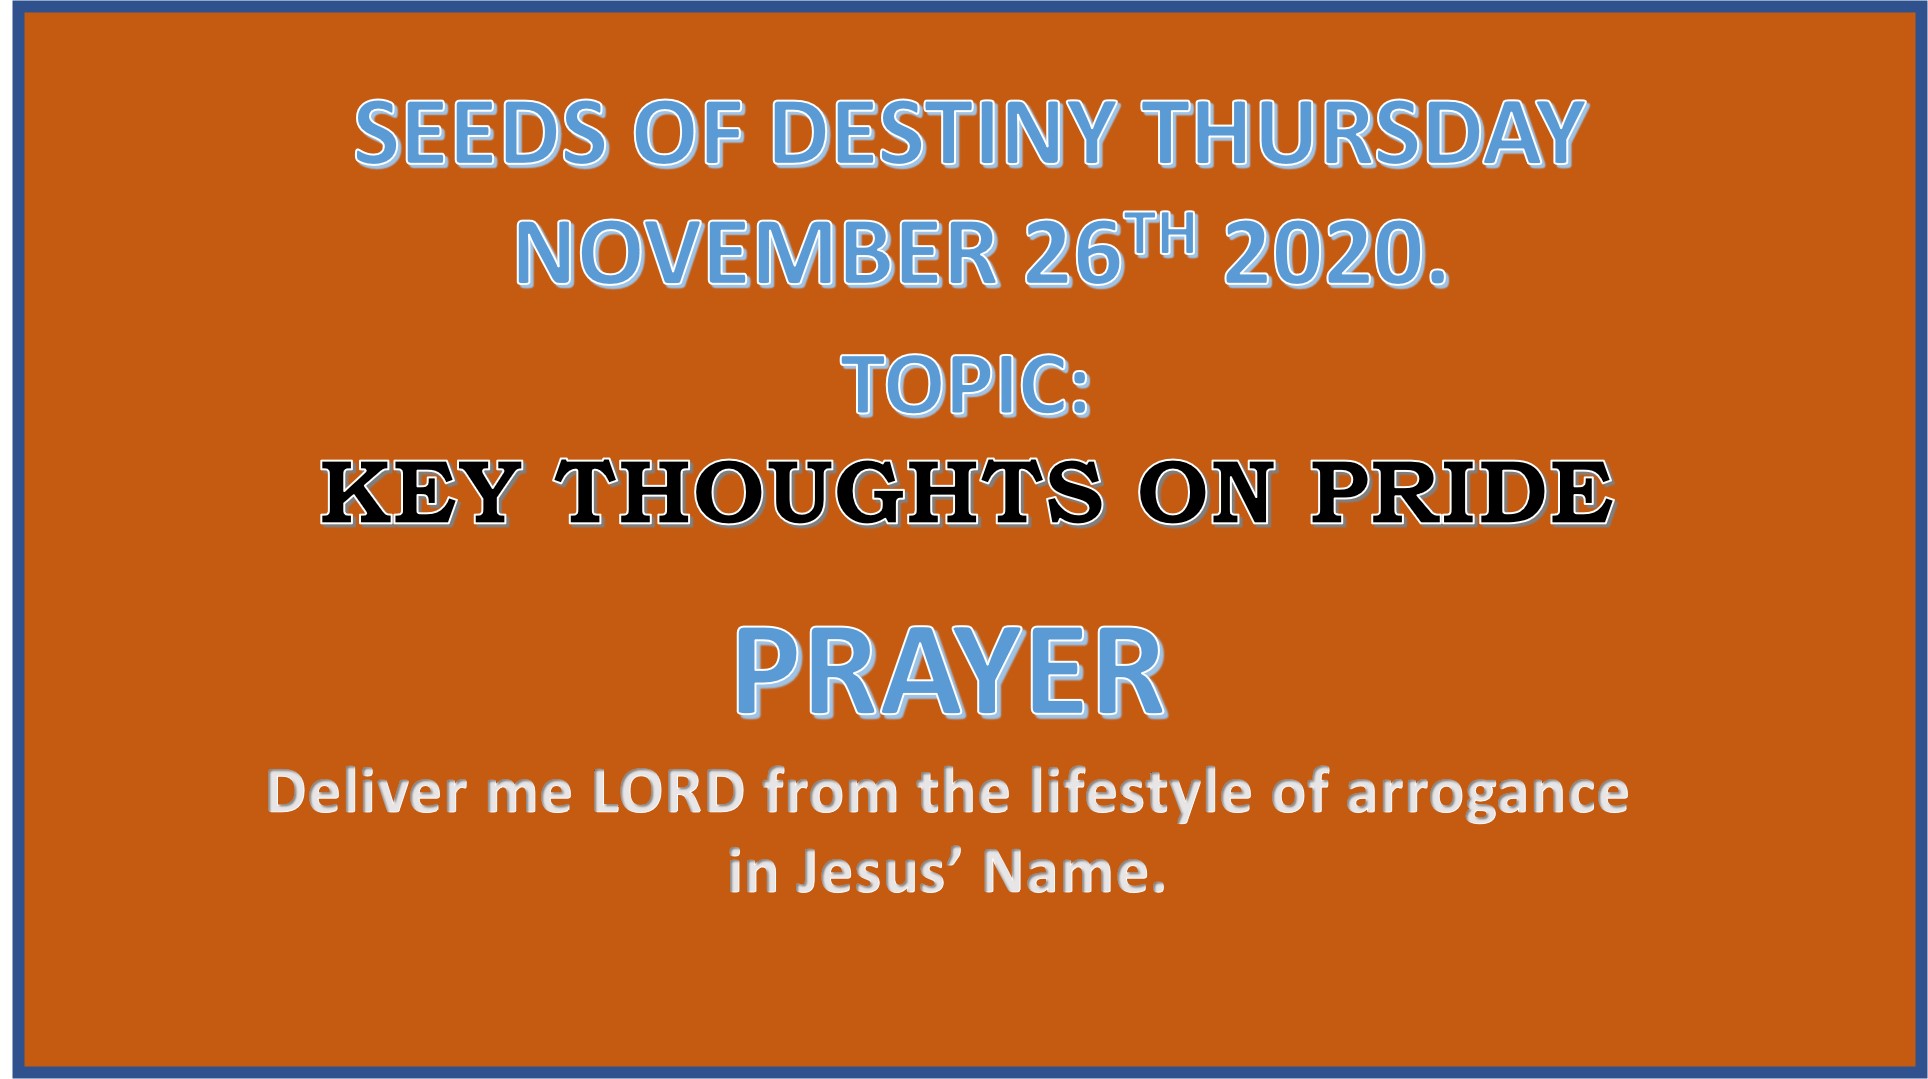 Seeds of Destiny Thursday 26th November 2020 by Dr Paul Enenche